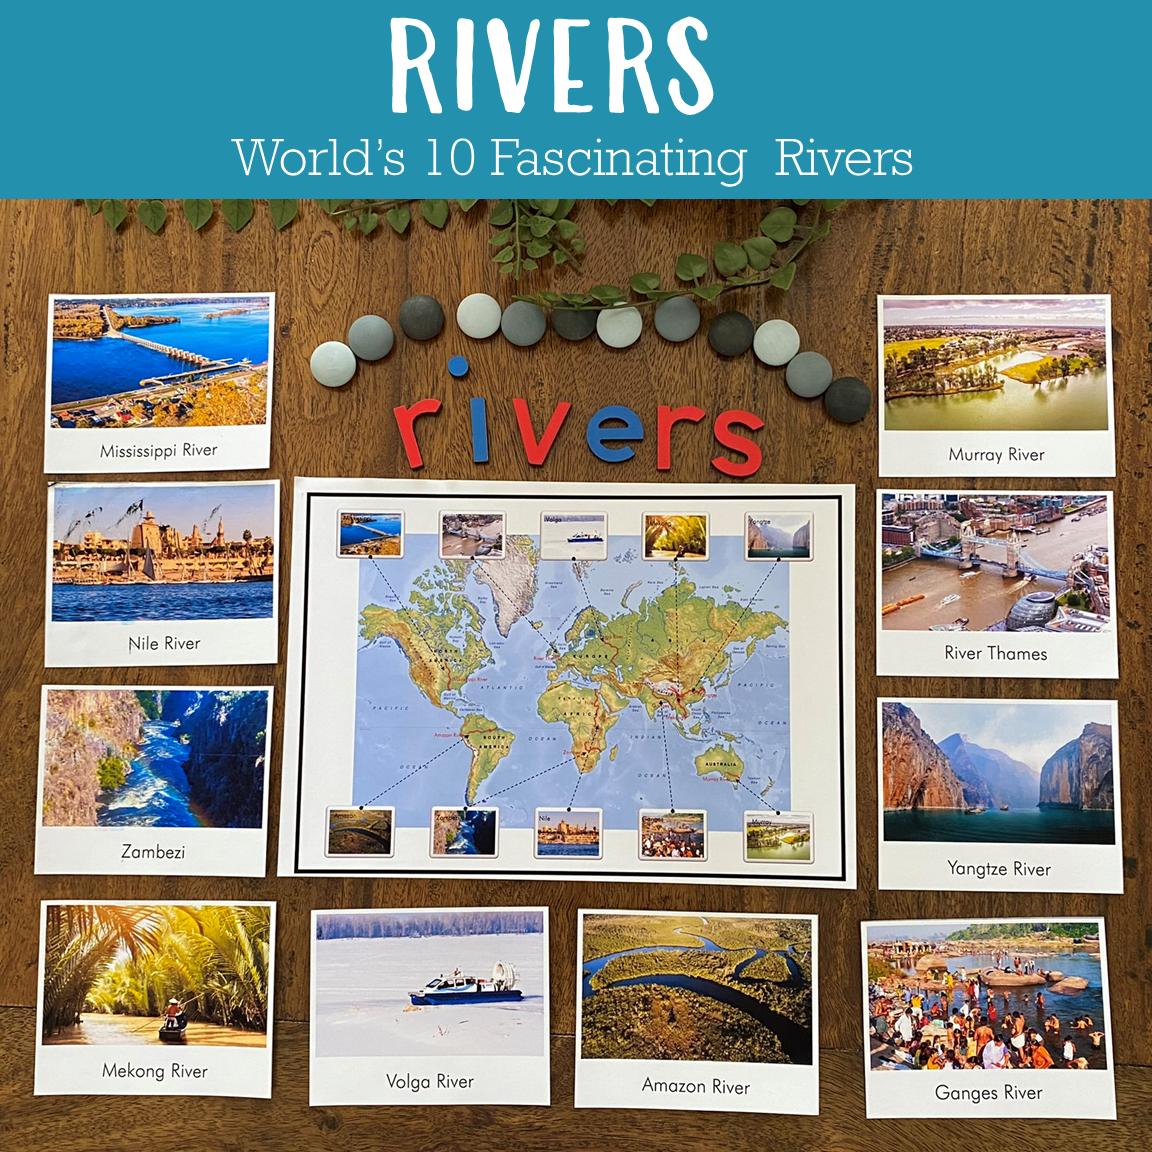 Rivers - World's 10 Fascinating Rivers